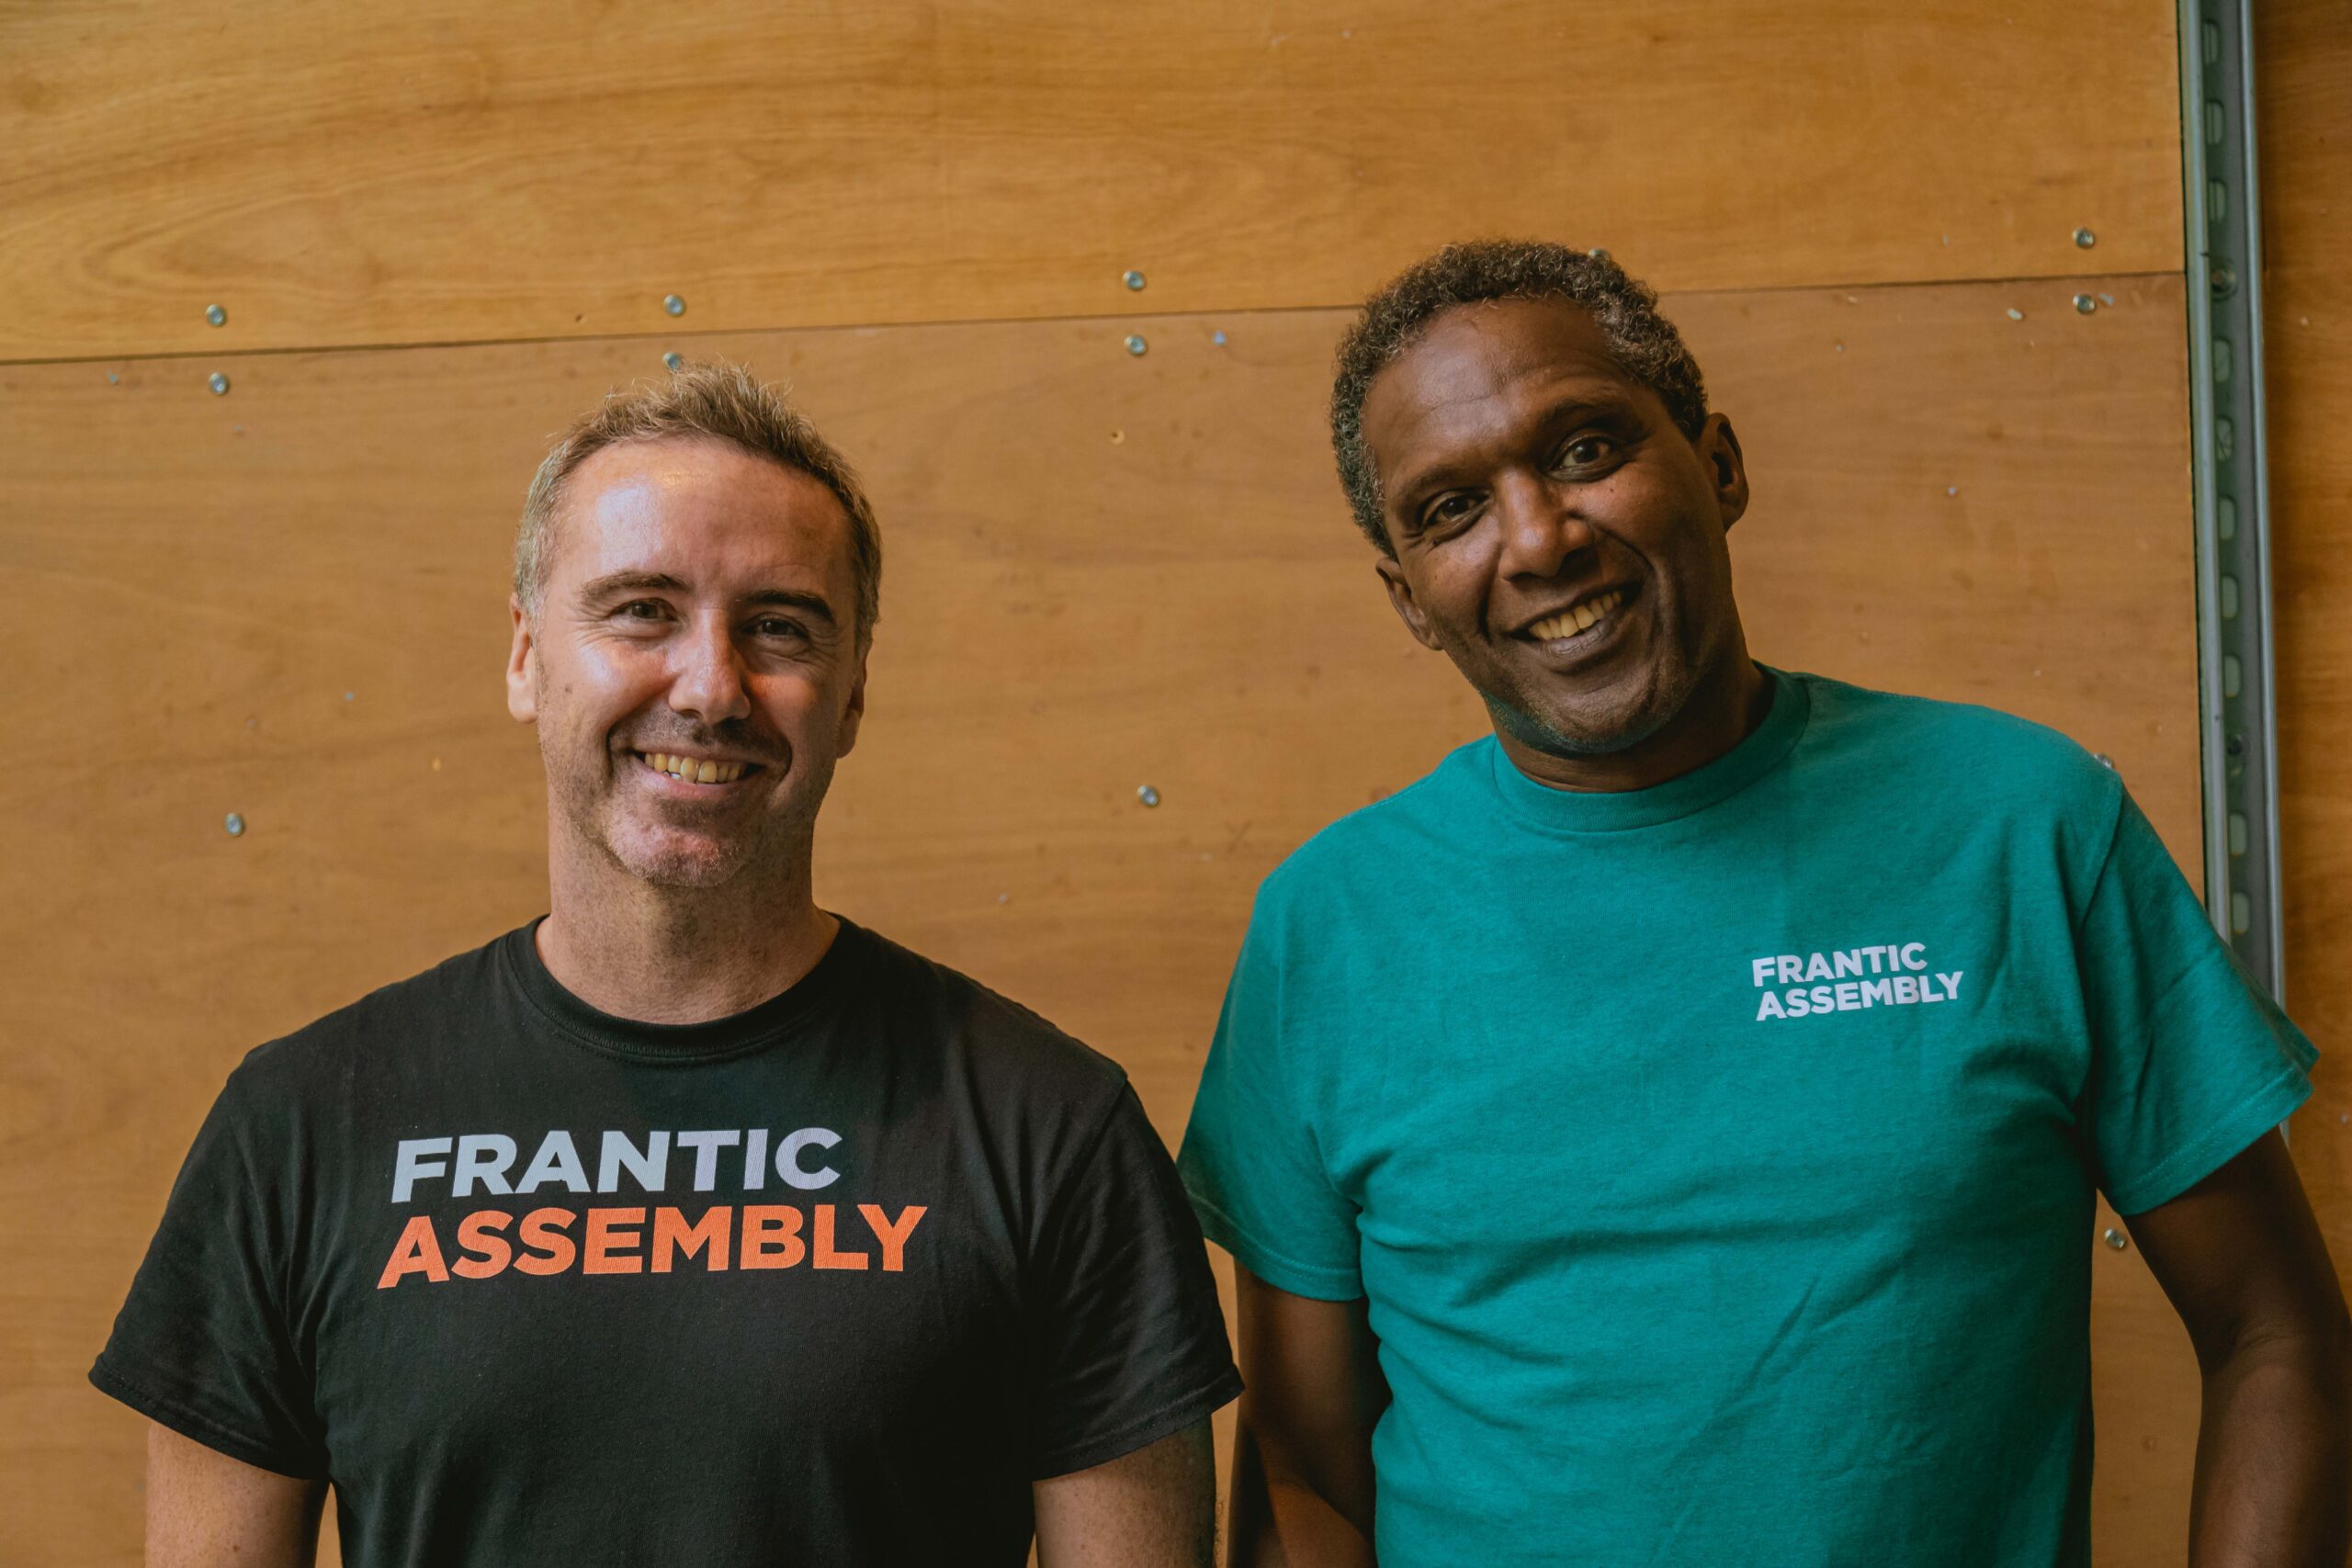 Frantic Assembly Artistic Director Scott Graham and Adaptor Lemn Sissay OBE smile against a wood-cladded wall. They are pictured from the torso up, and both are wearing t-shirts with Frantic Assembly branding. Scott's t-shirt is black, with a grey and orange logo across the chest, and Lemn's is teal, with a white logo on the left of the chest.